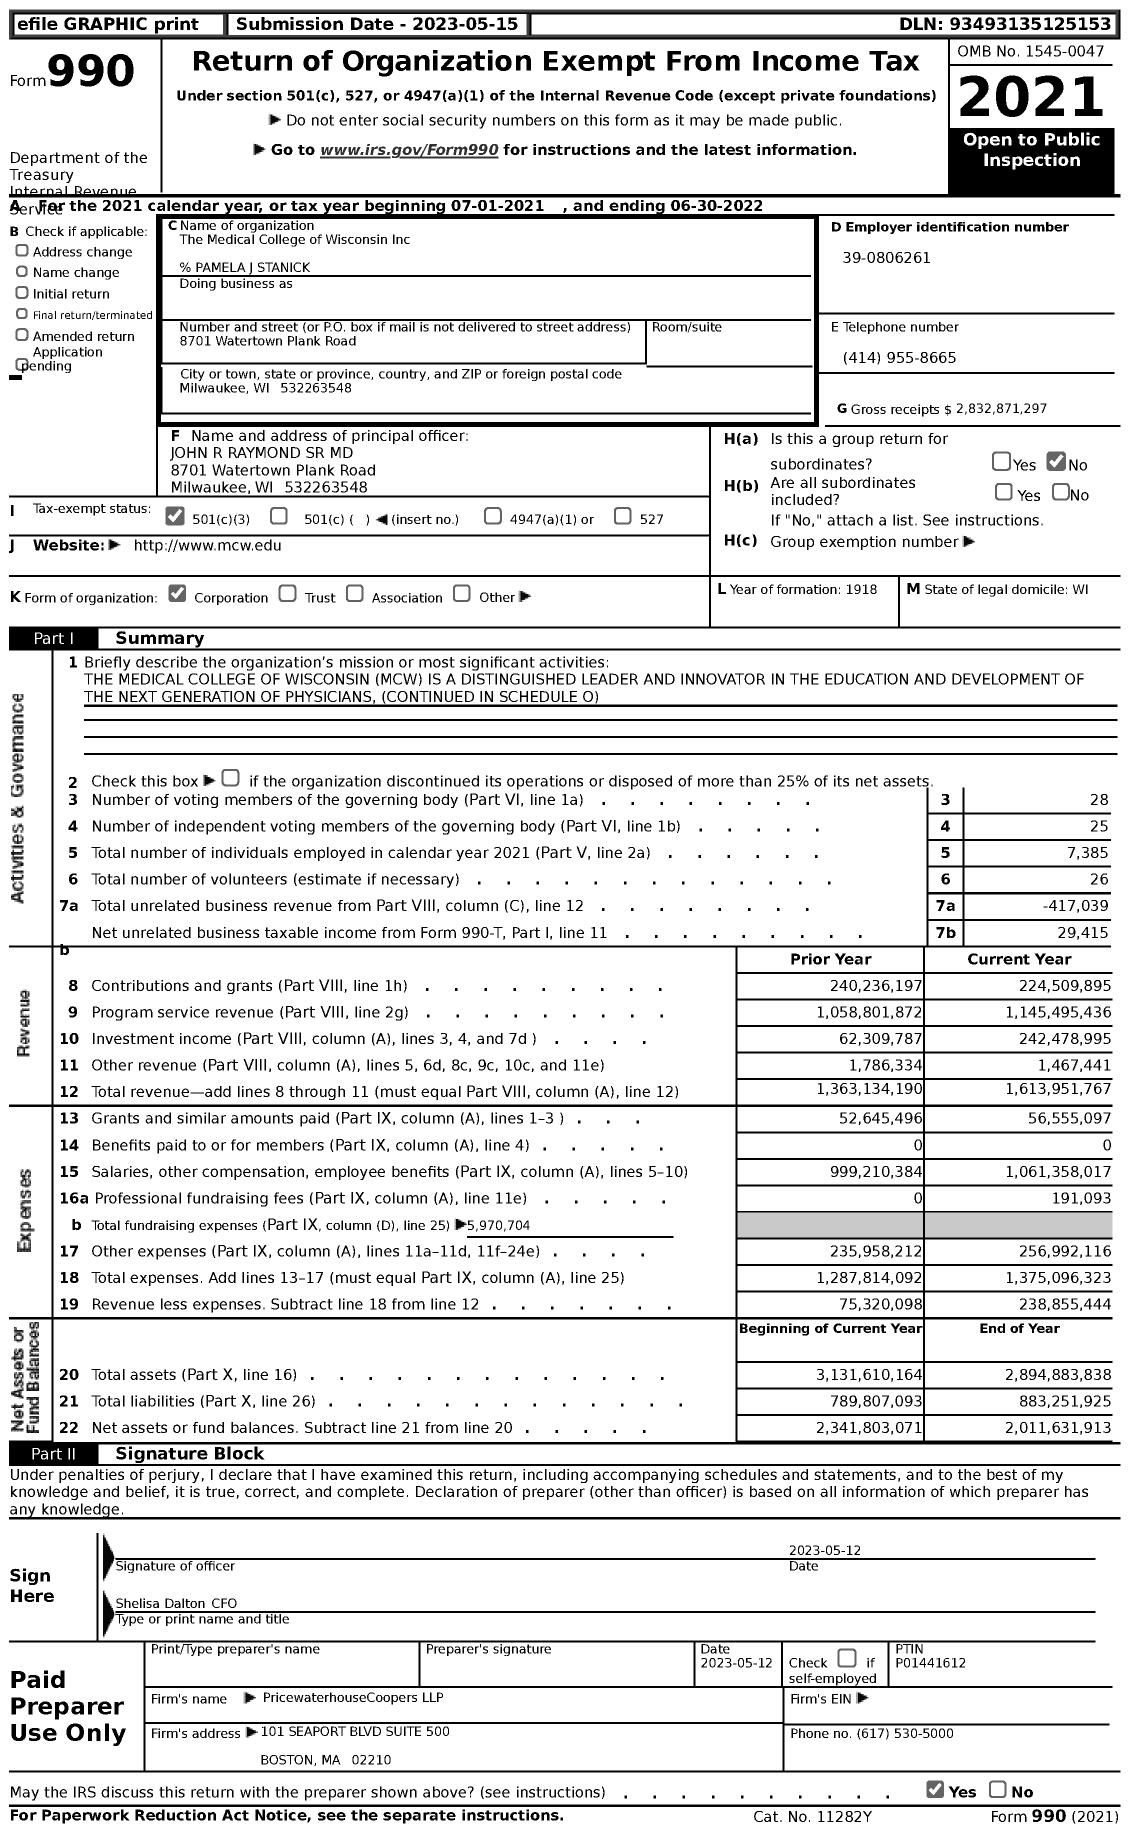 Image of first page of 2021 Form 990 for Medical College of Wisconsin (MCW)